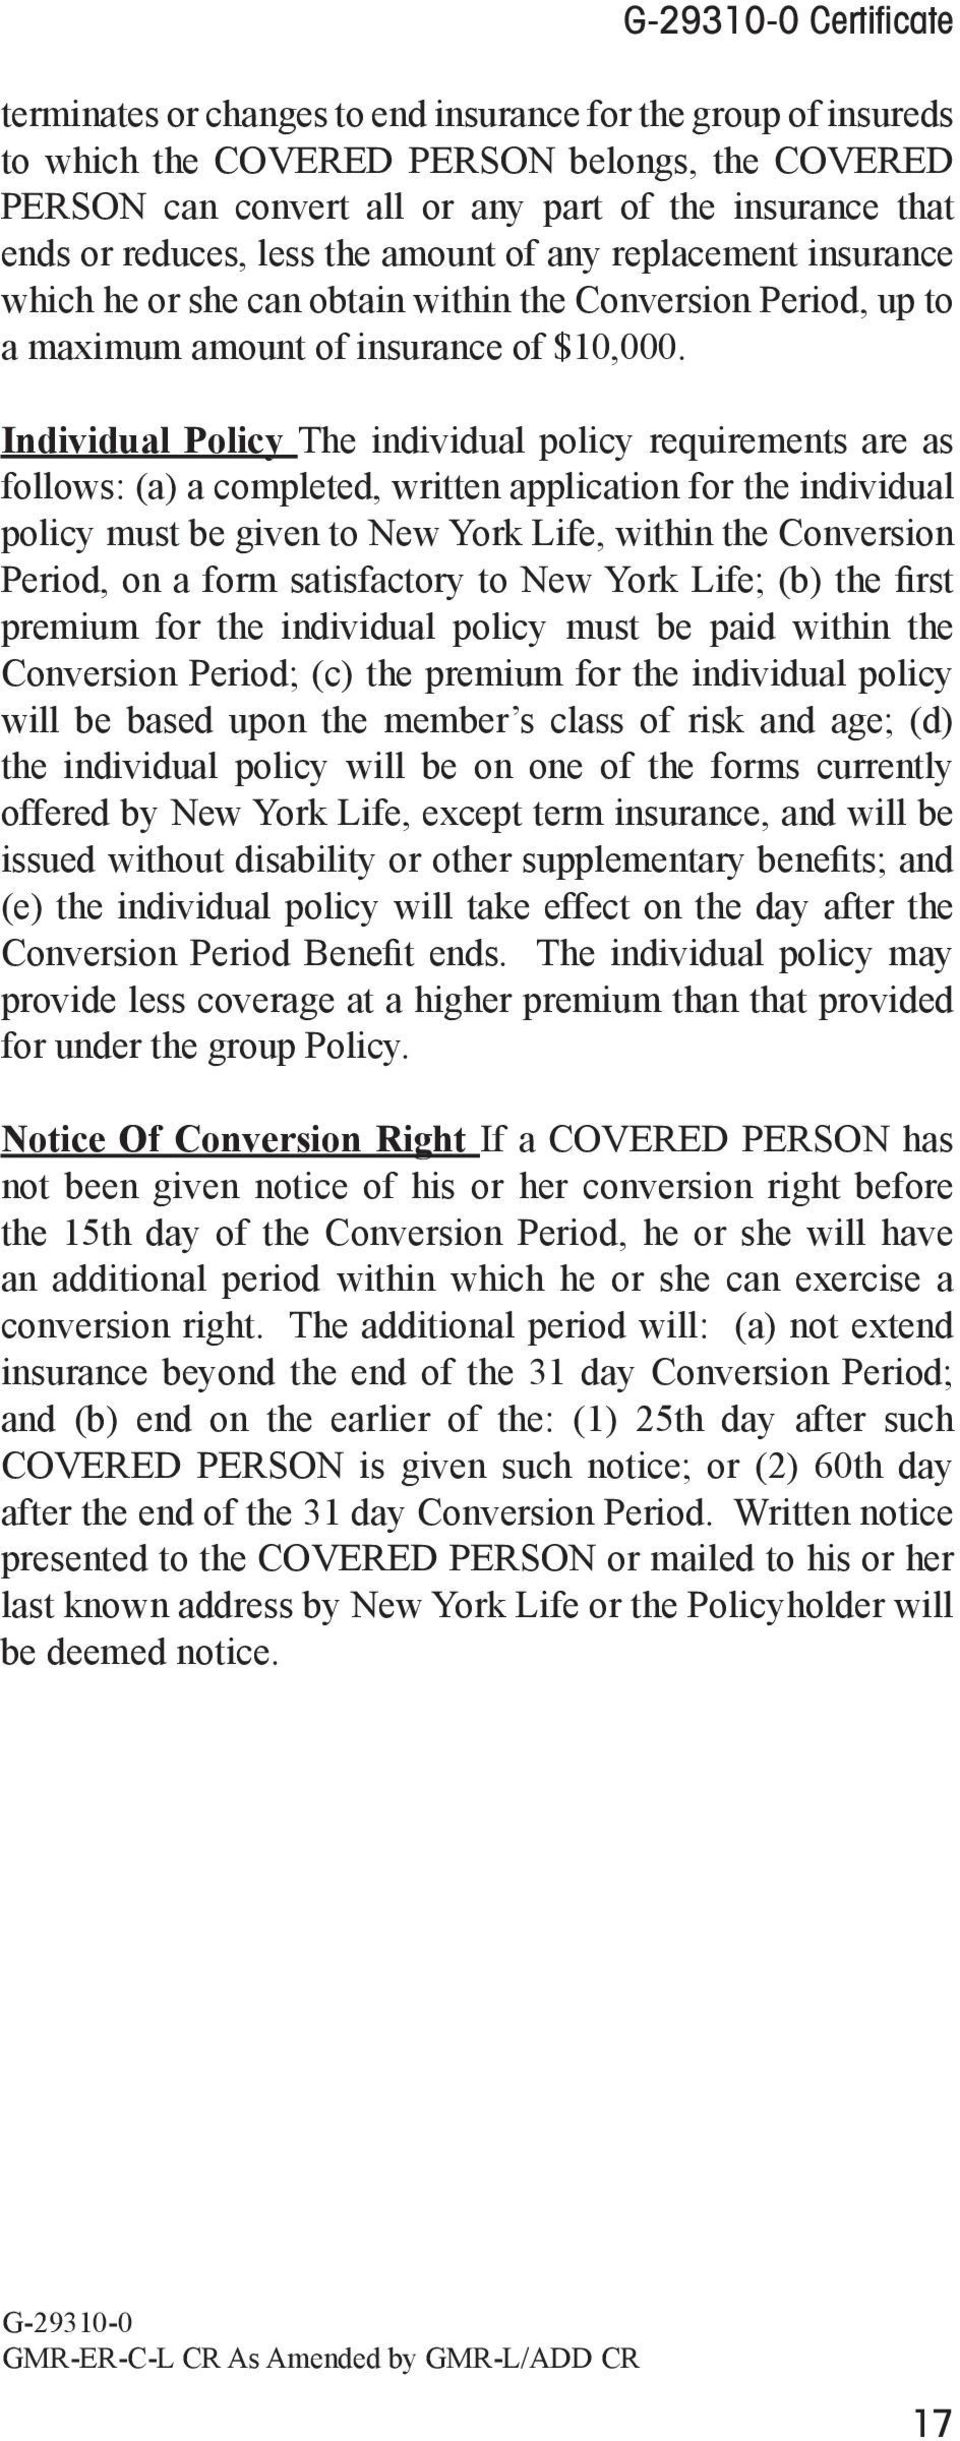 Individual Policy The individual policy requirements are as follows: (a) a completed, written application for the individual policy must be given to New York Life, within the Conversion Period, on a